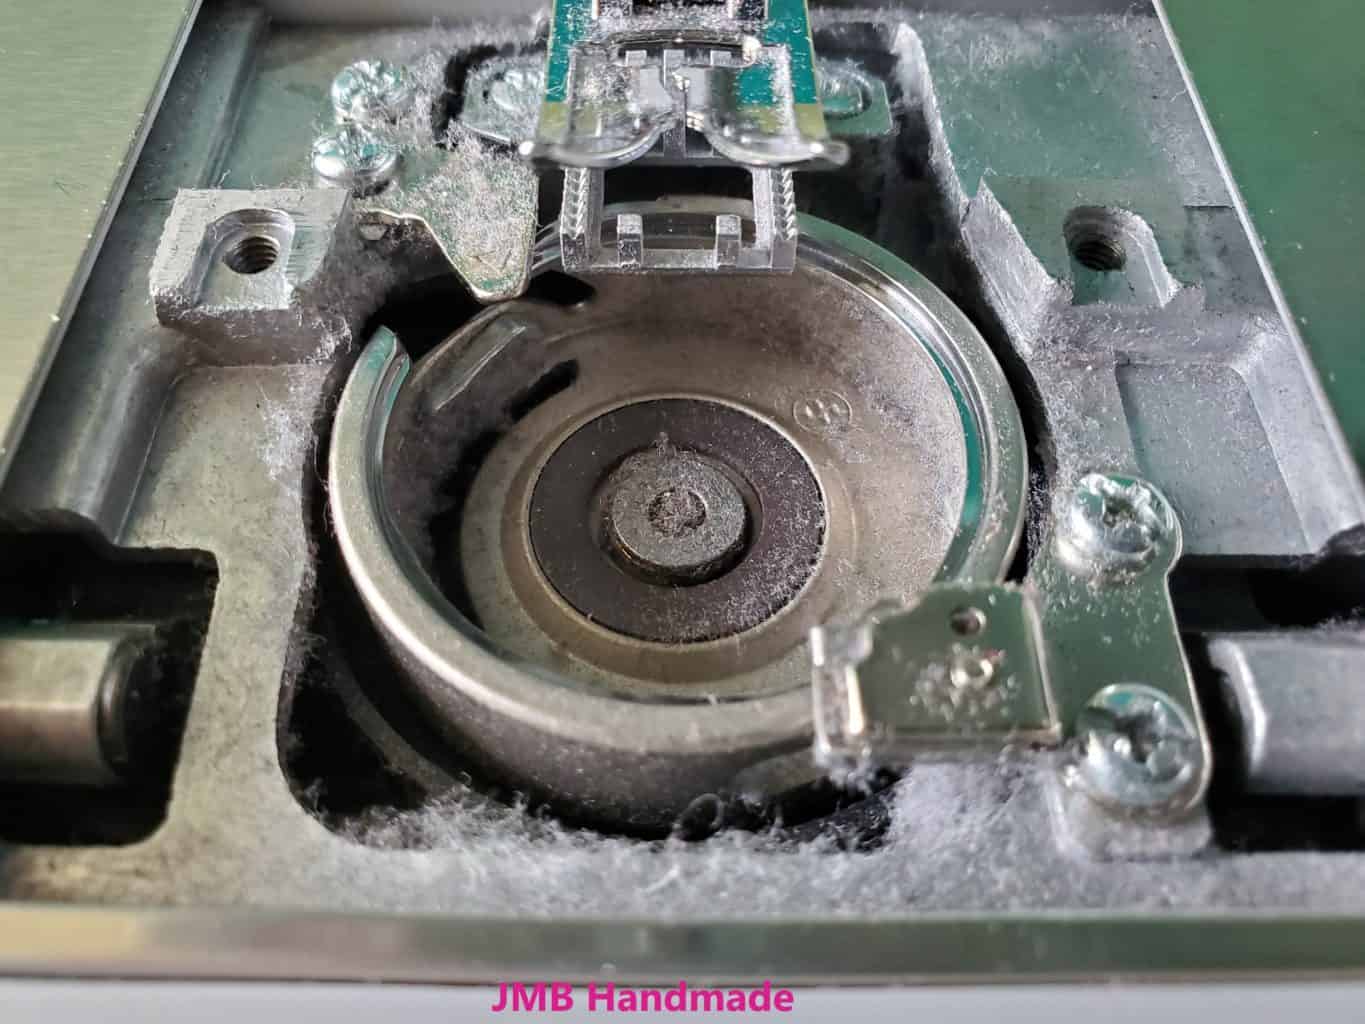 clean your sewing machine